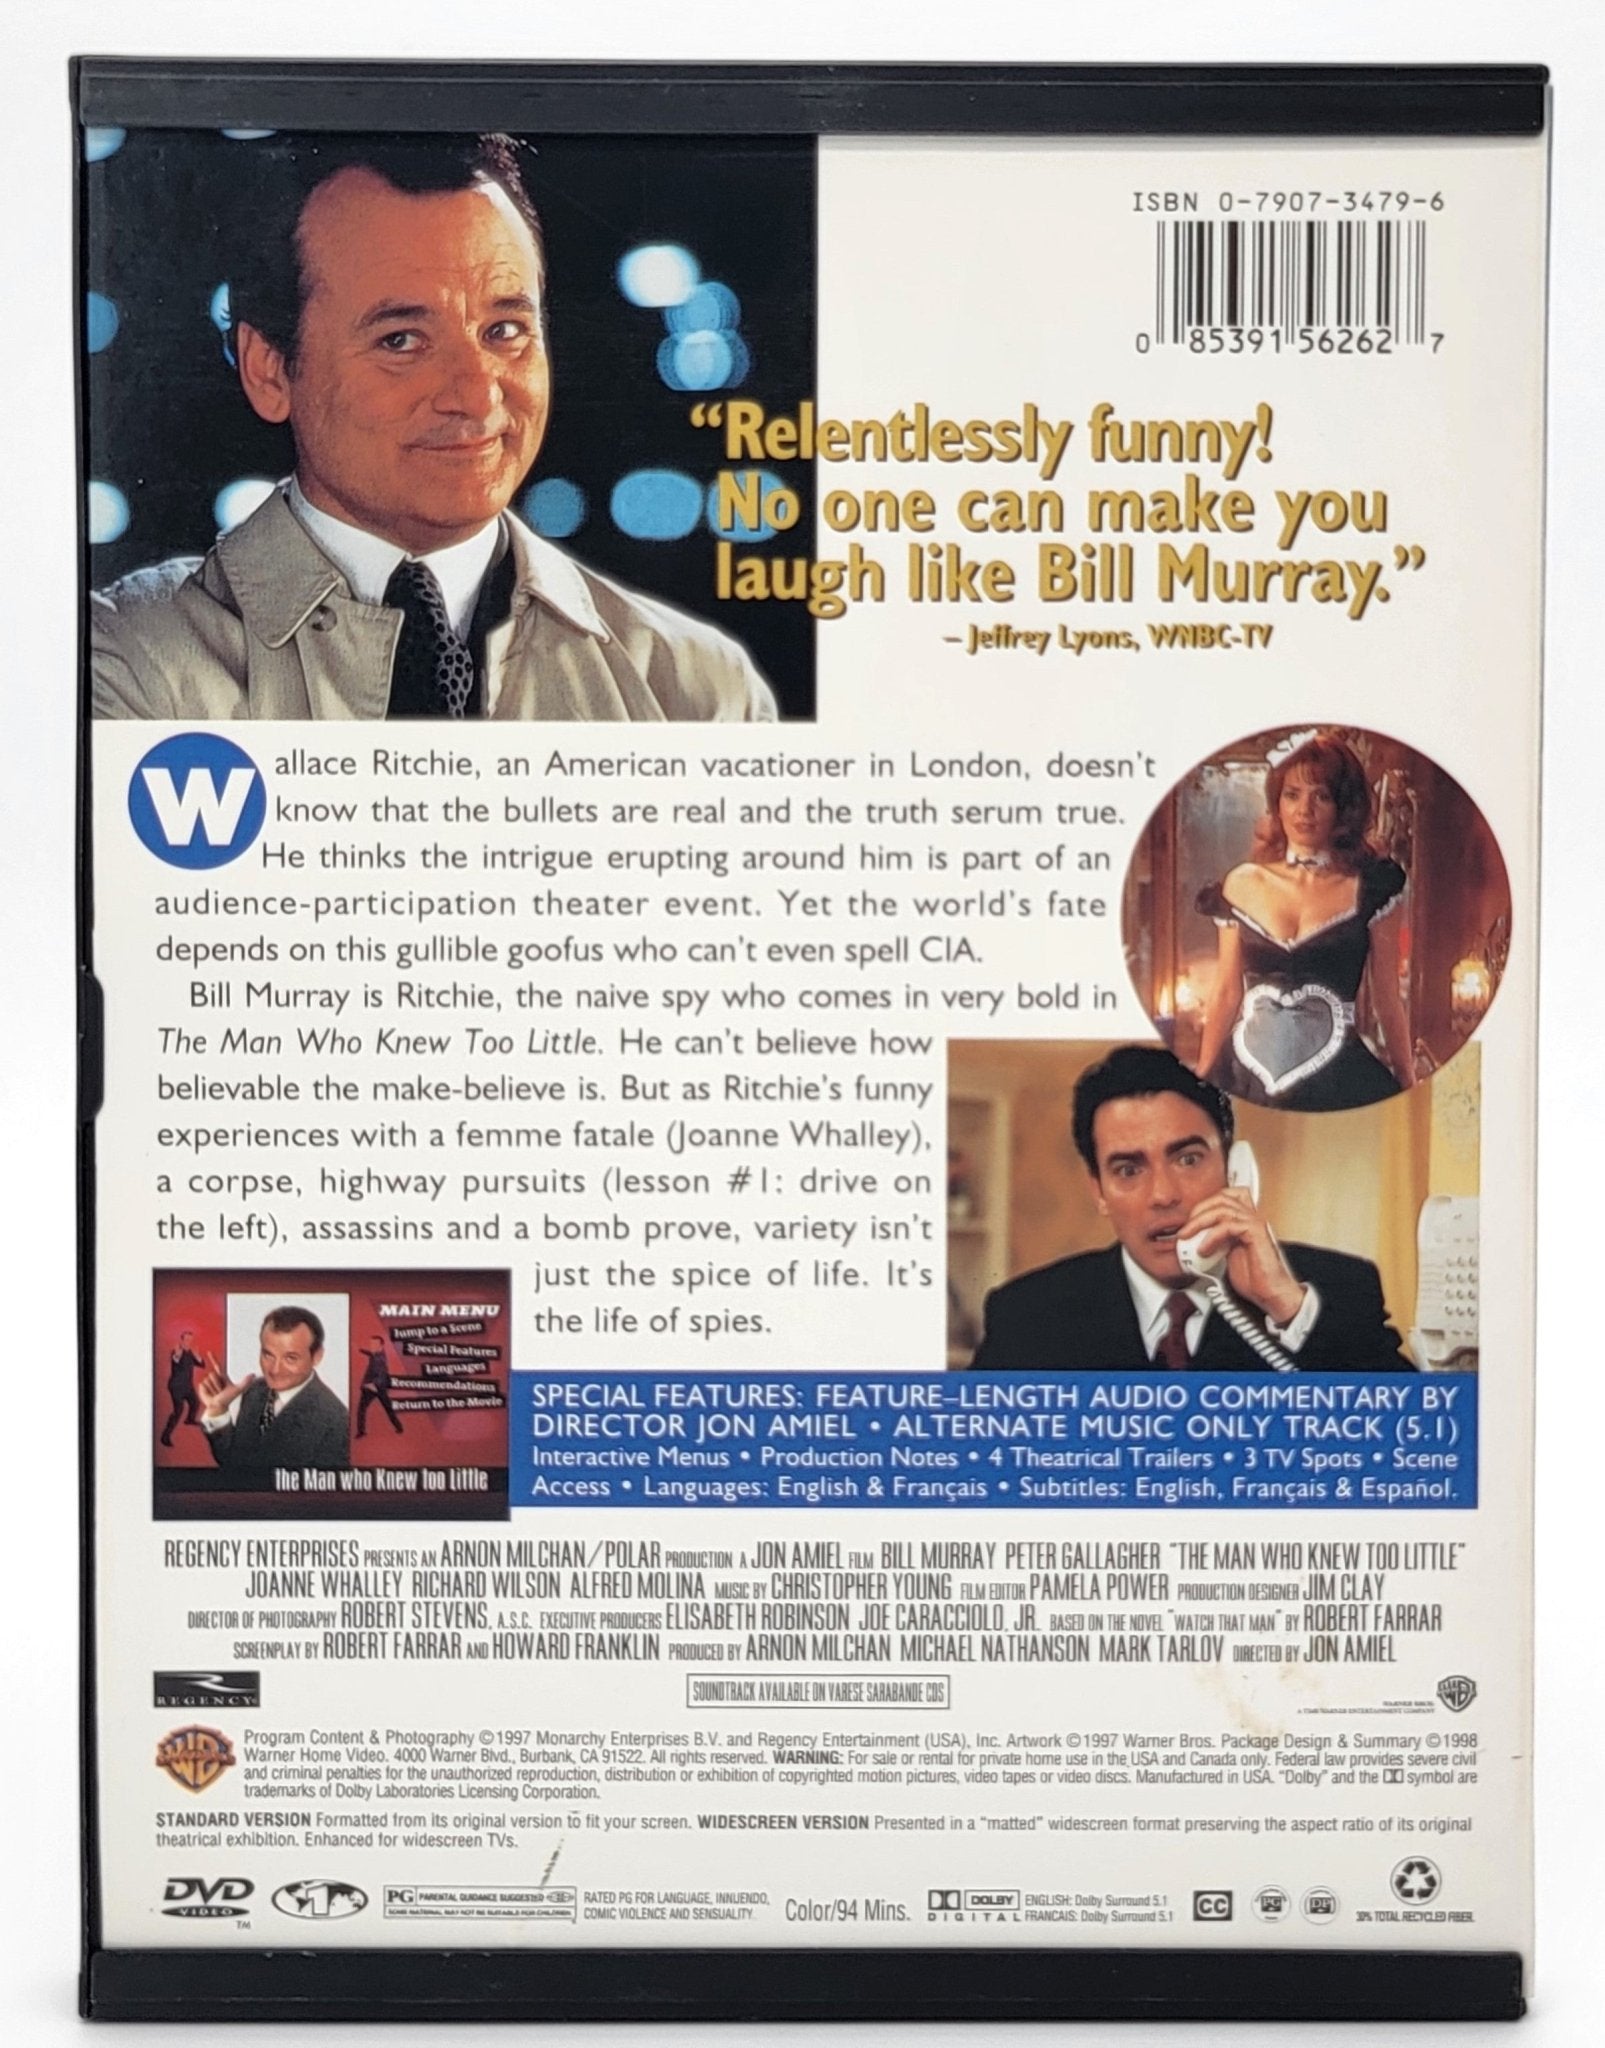 Warner Brothers - The Man Who Knew Too Little | DVD | Widescreen - DVD - Steady Bunny Shop